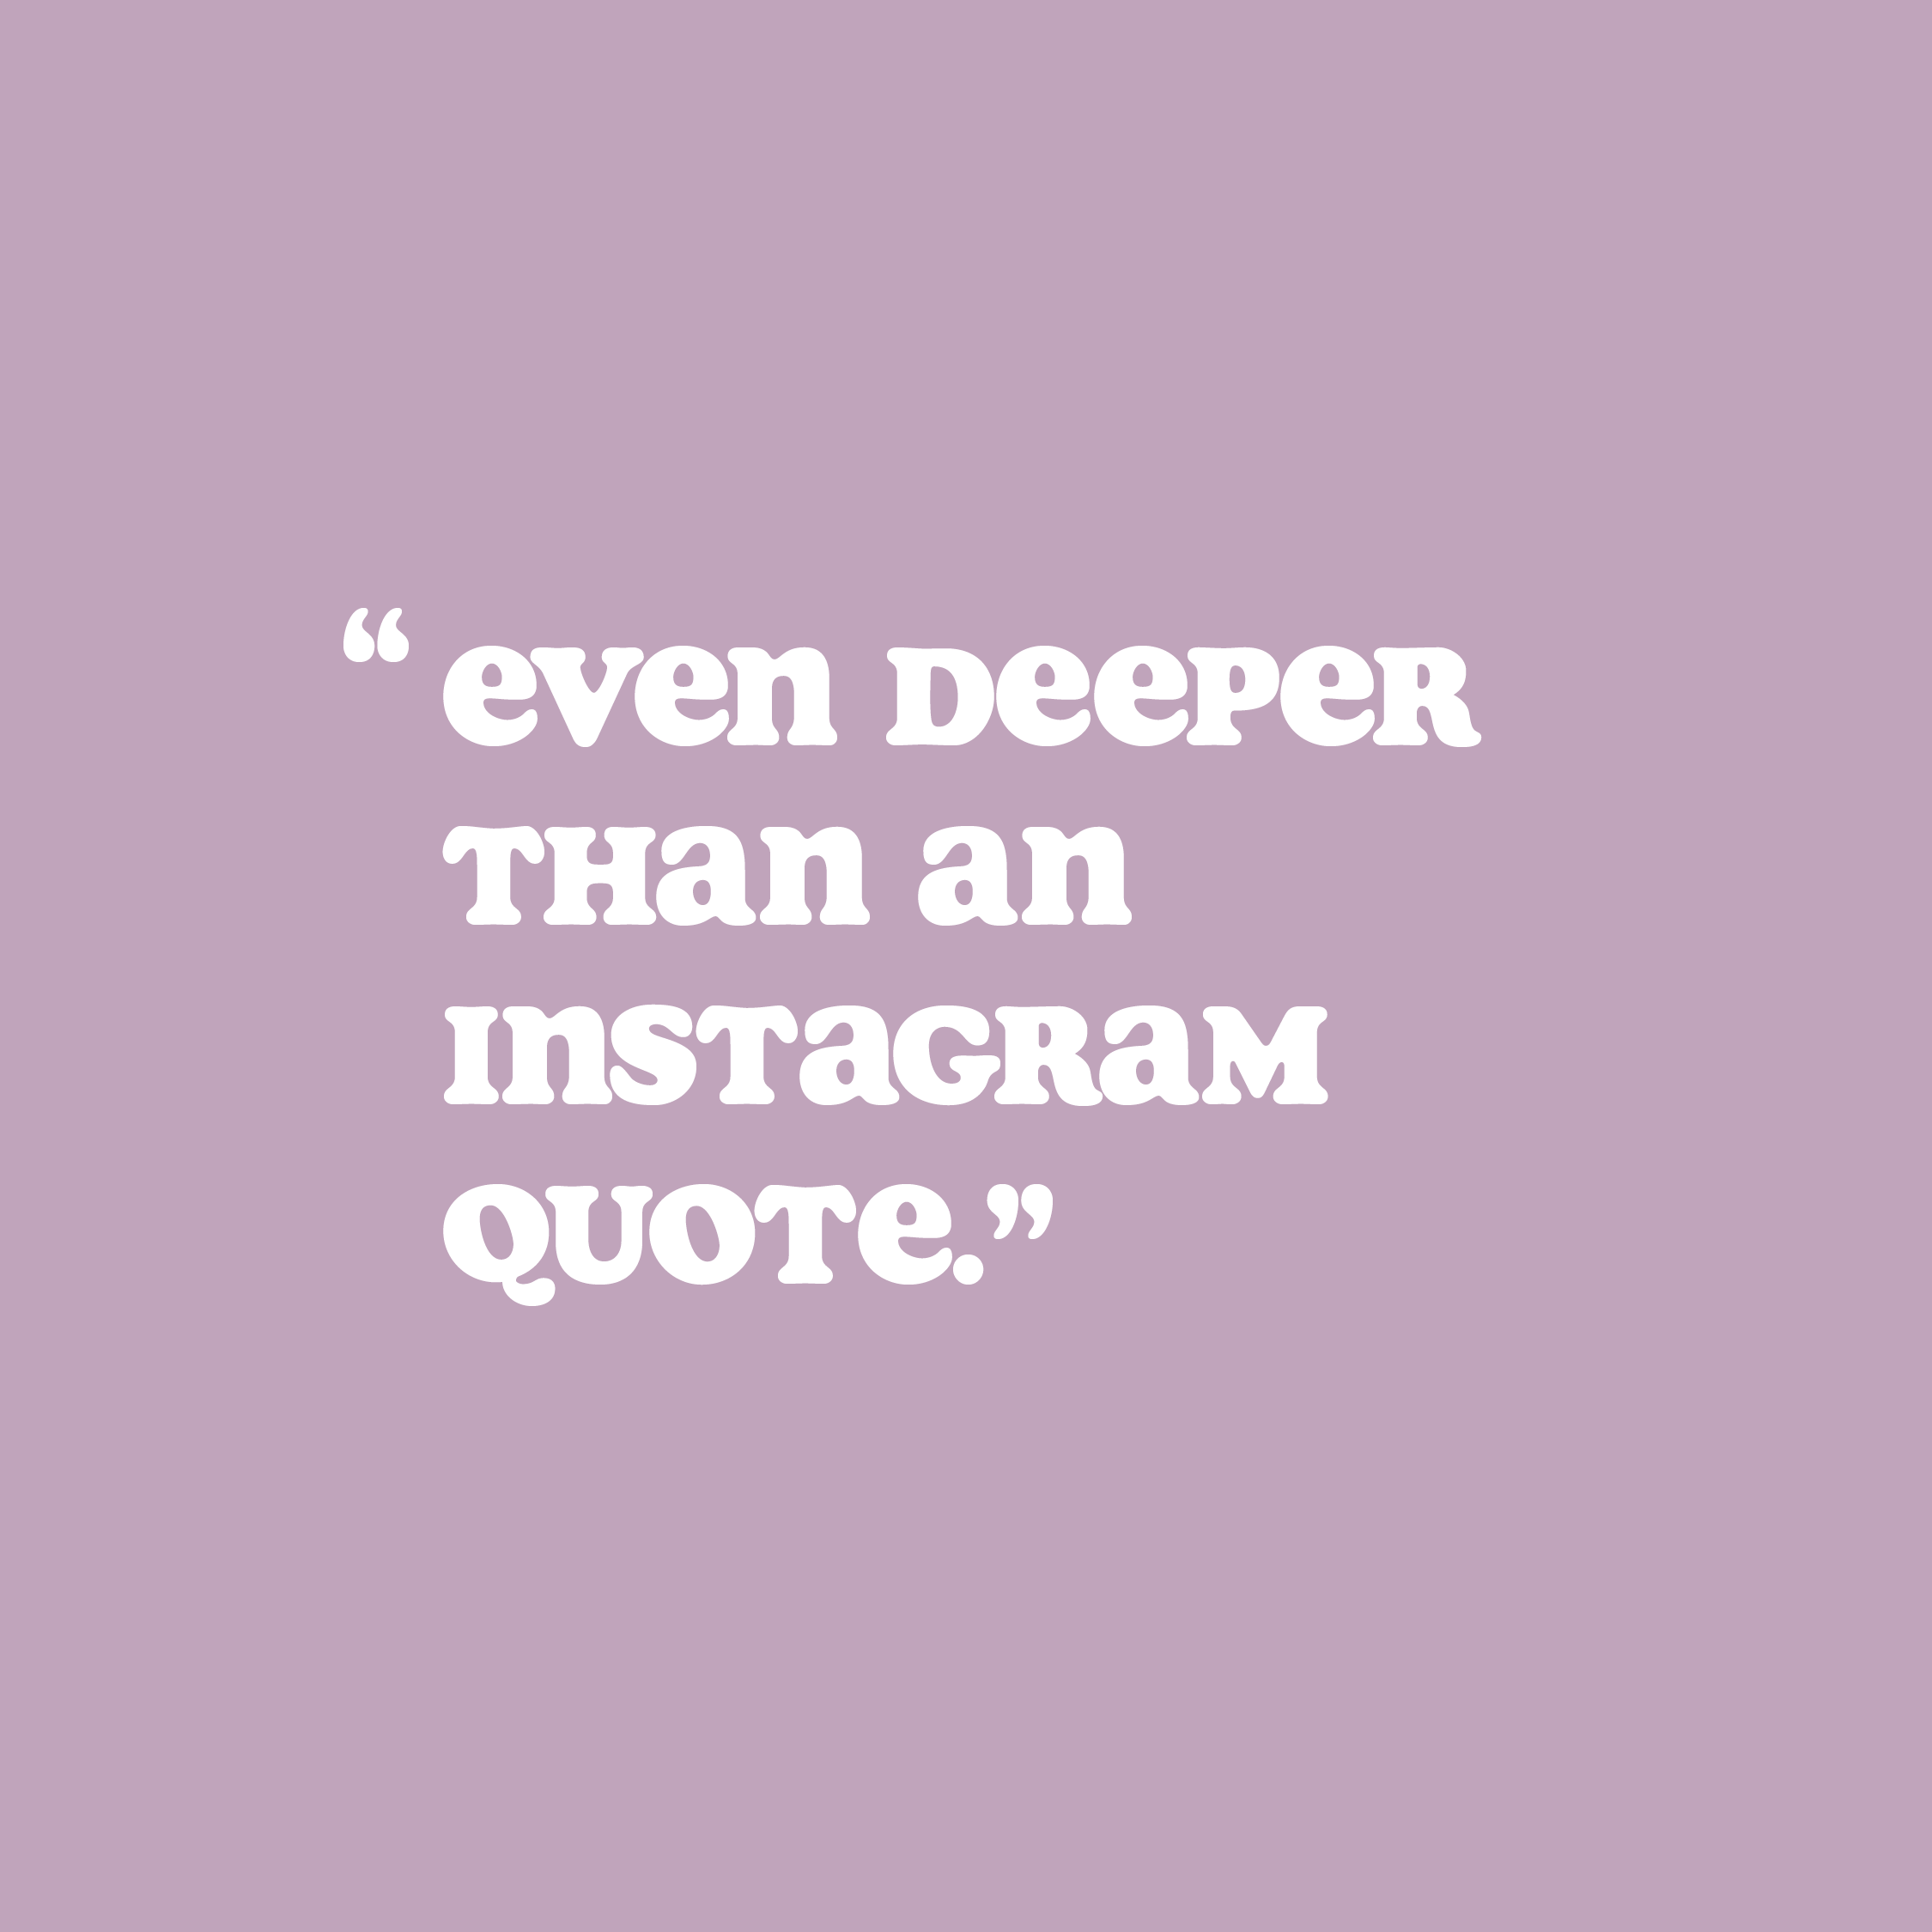 White type sits on a soft lilac background. It says ''Even deeper than an Instagram quote.' Designed to look like the quotes often seen on social media.